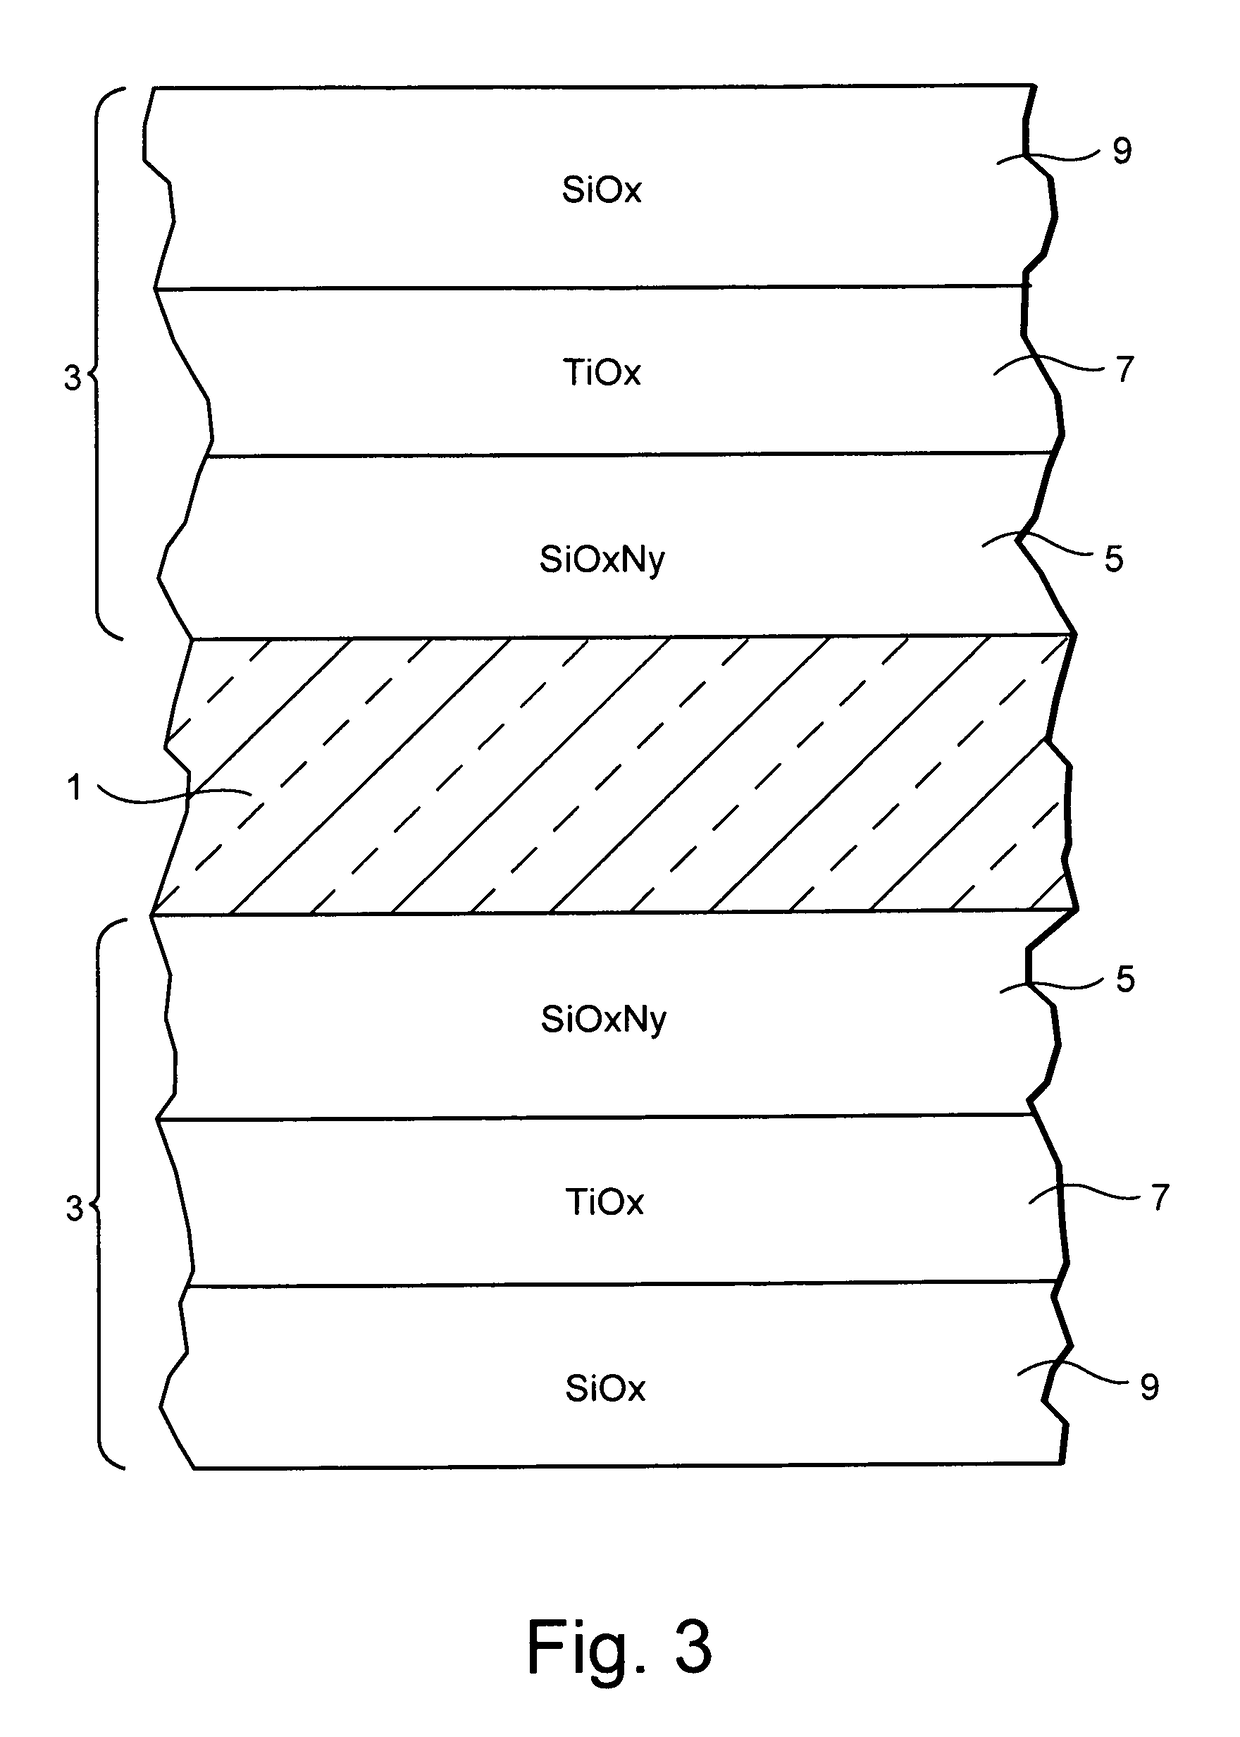 Temperable three layer antirefrlective coating, coated article including temperable three layer antirefrlective coating, and/or method of making the same